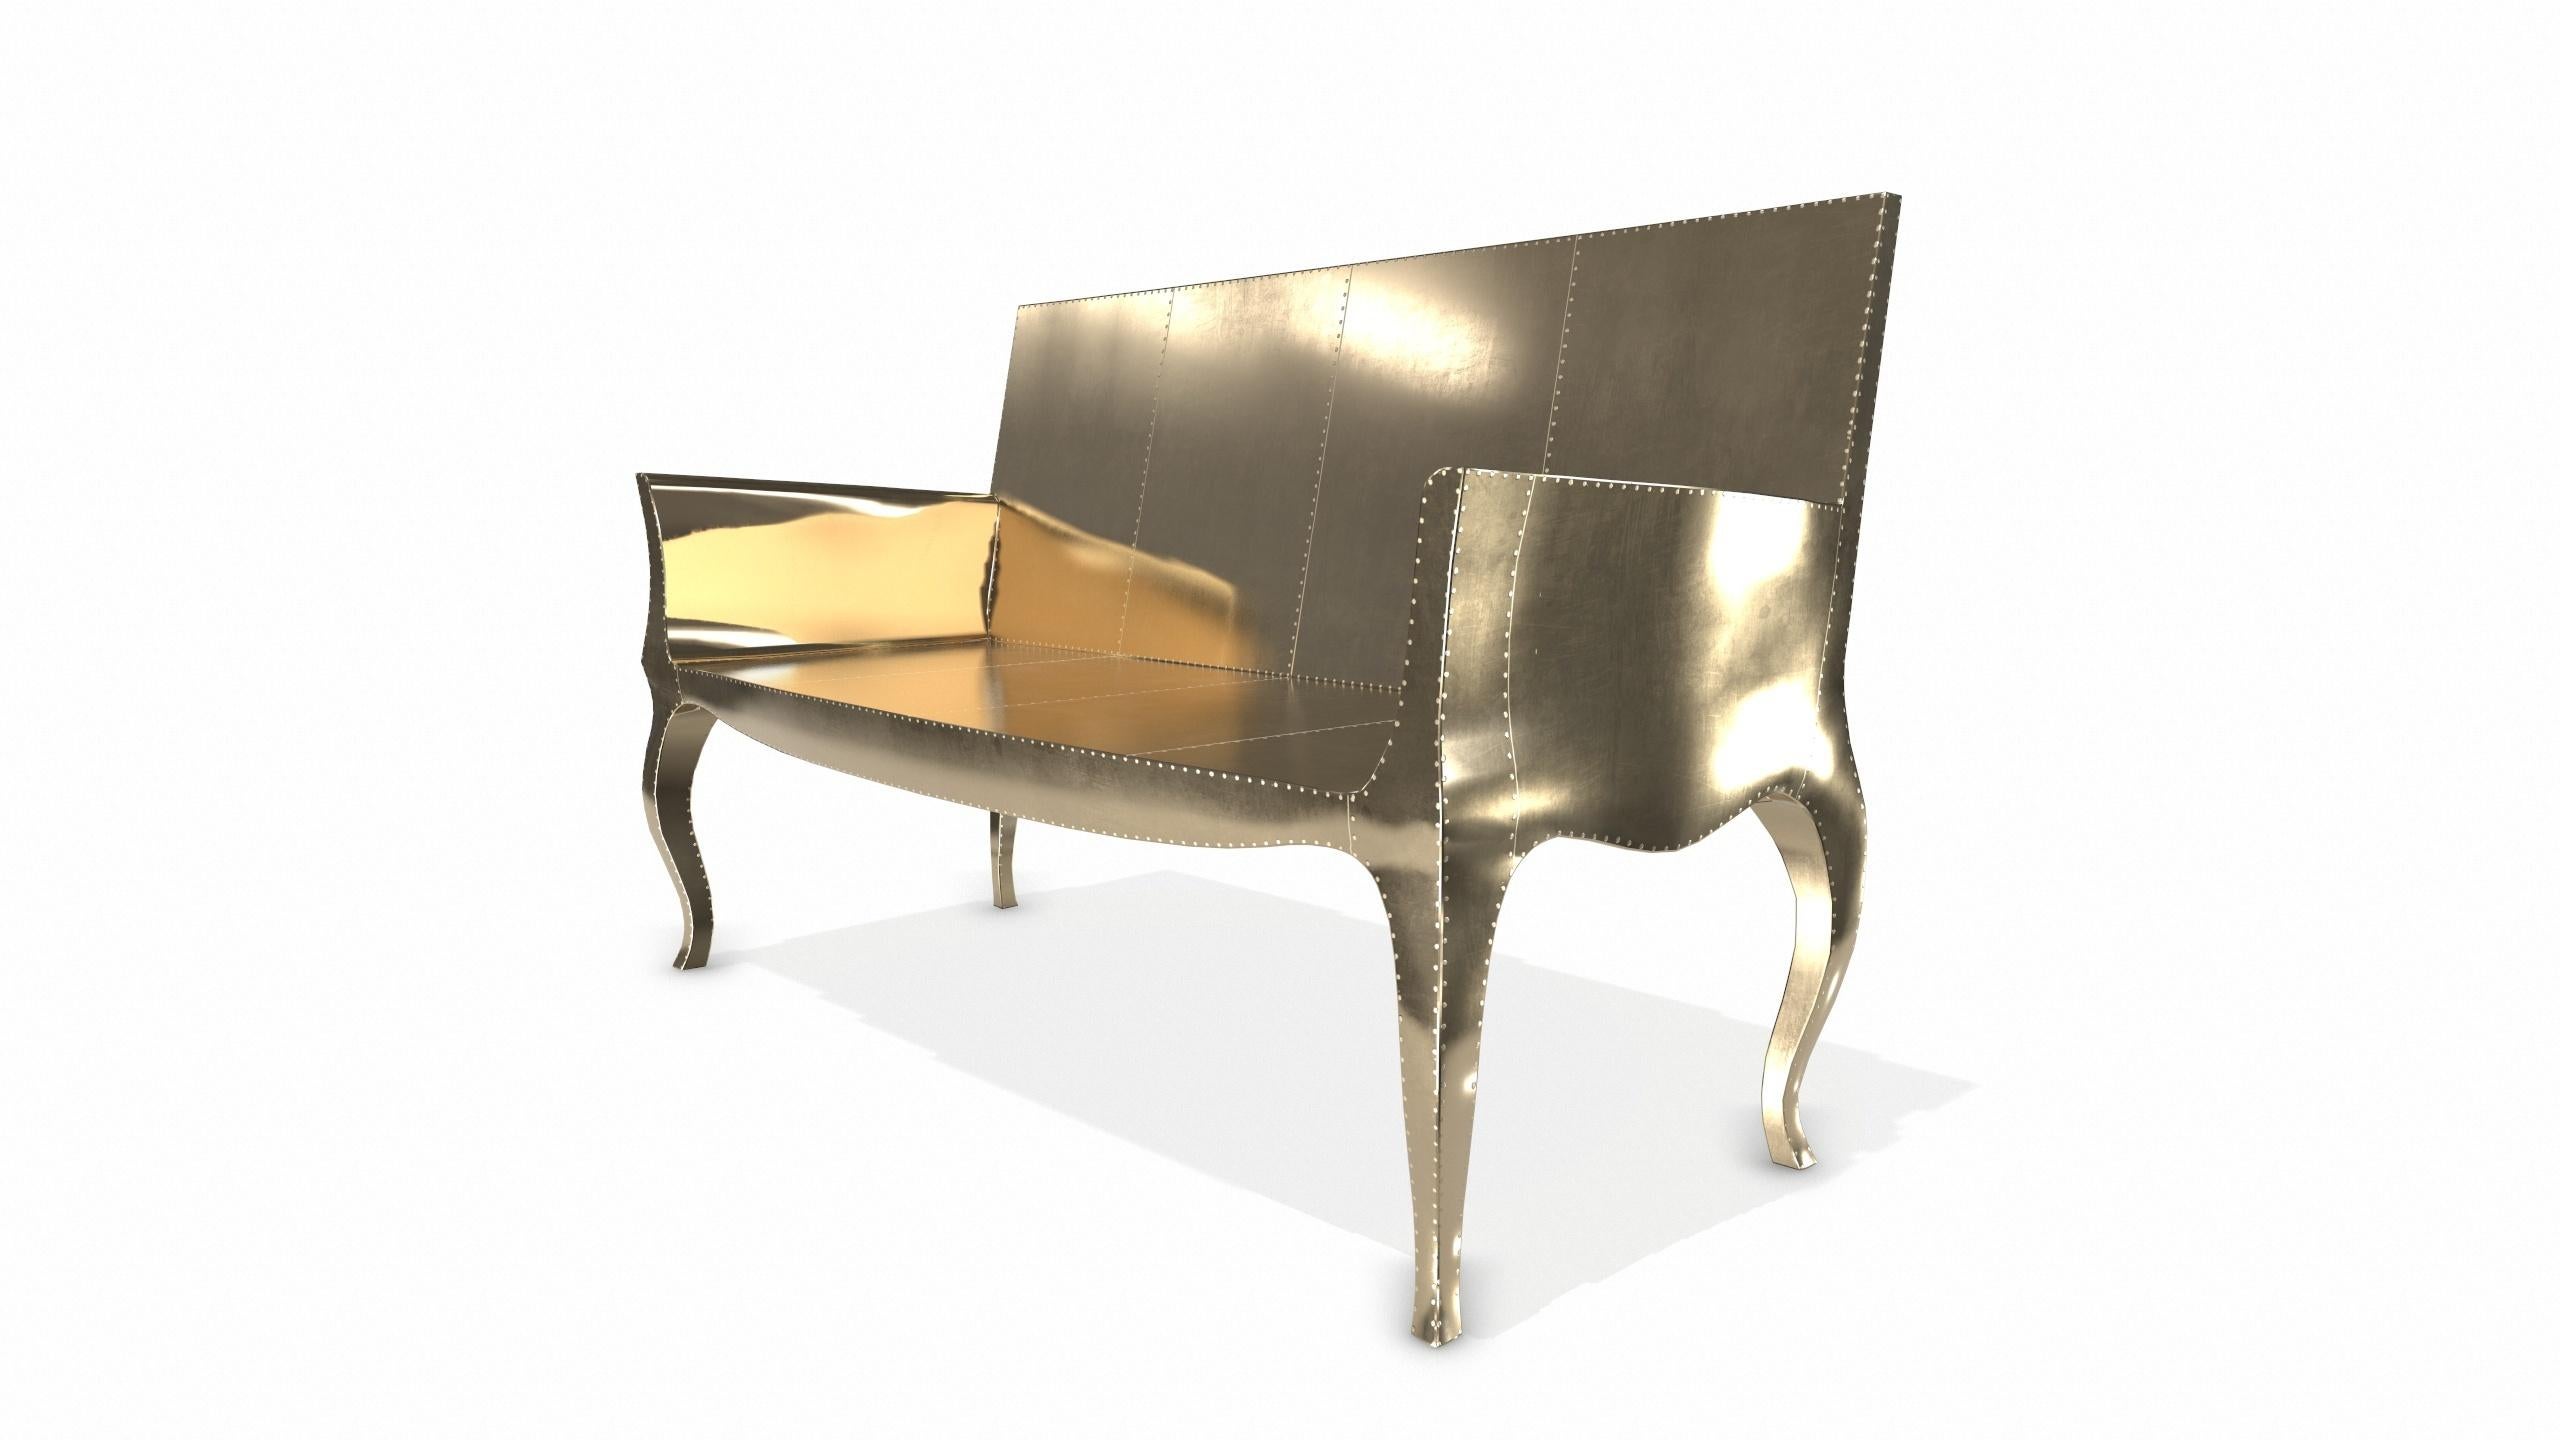 Hand-Crafted Louise Settee Art Deco Living Room Sets in Smooth Brass by Paul Mathieu For Sale